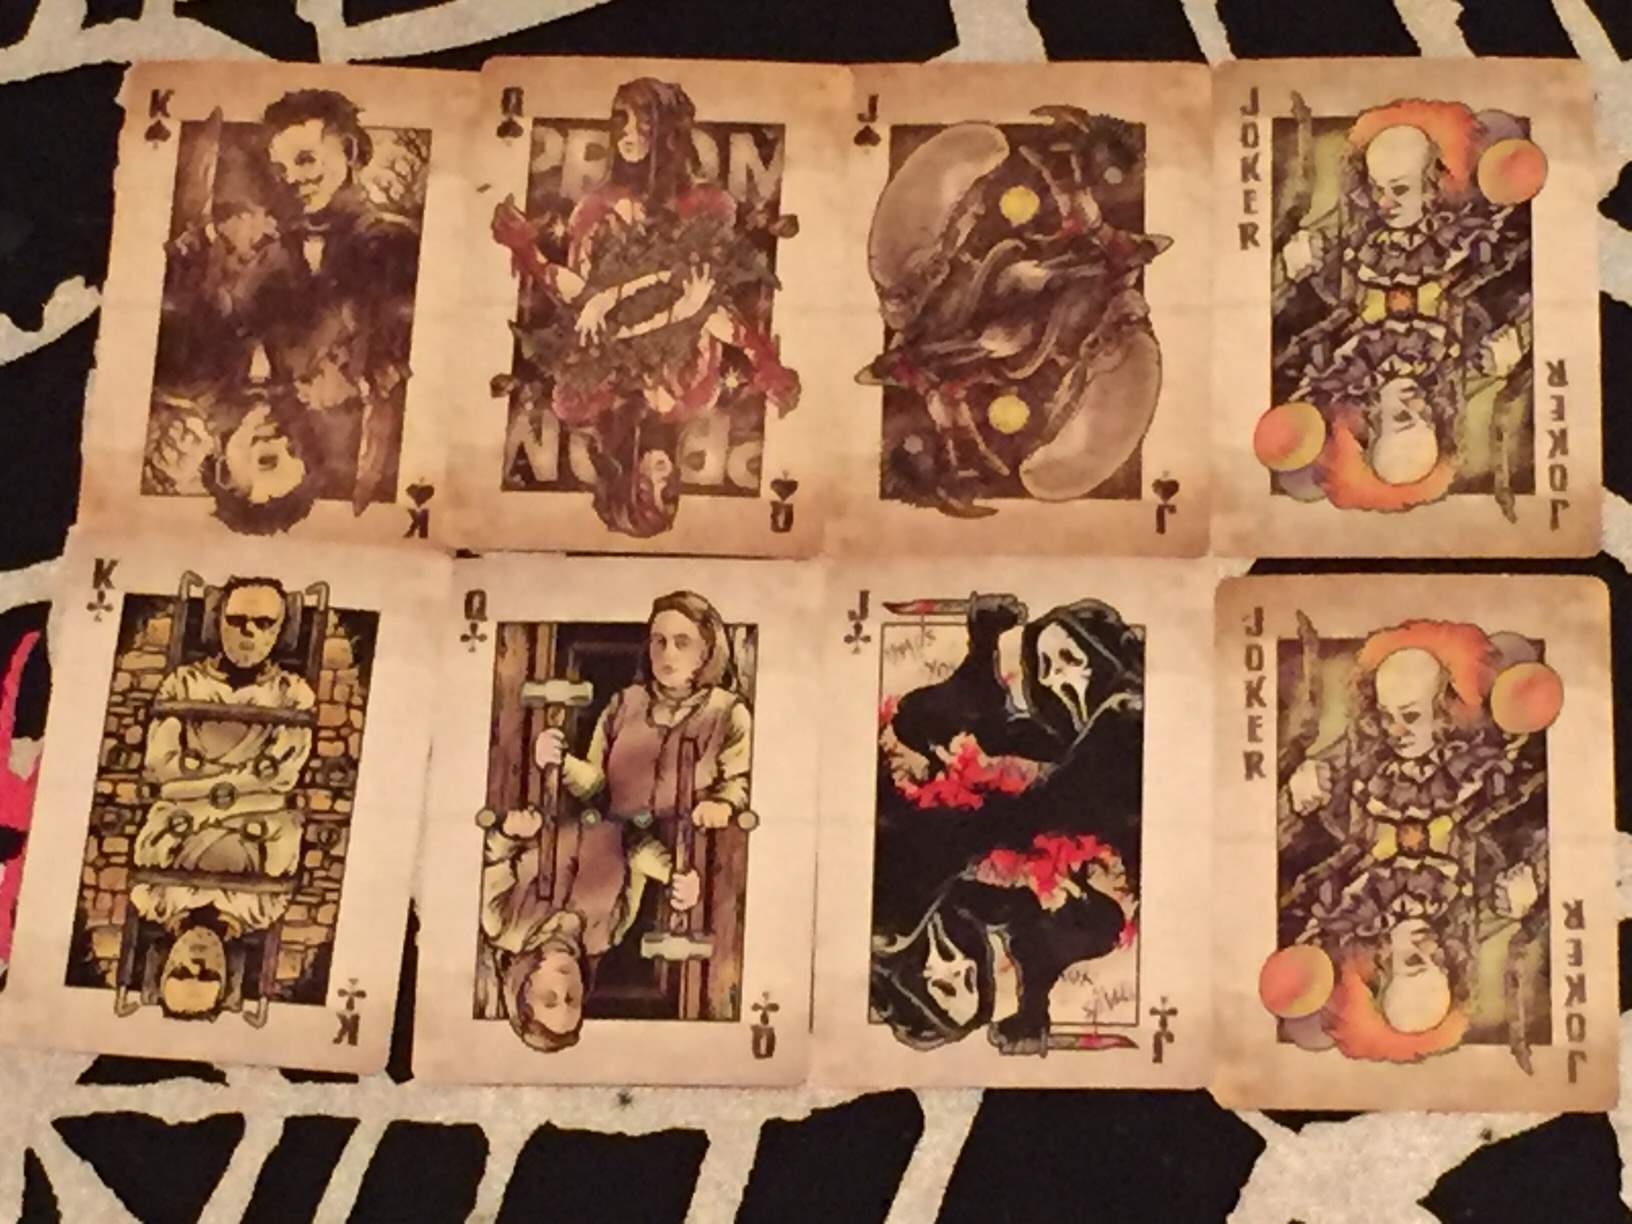 Two sets of face cards and the jokers in the deck of playing cards included in February 2016's Horror Block